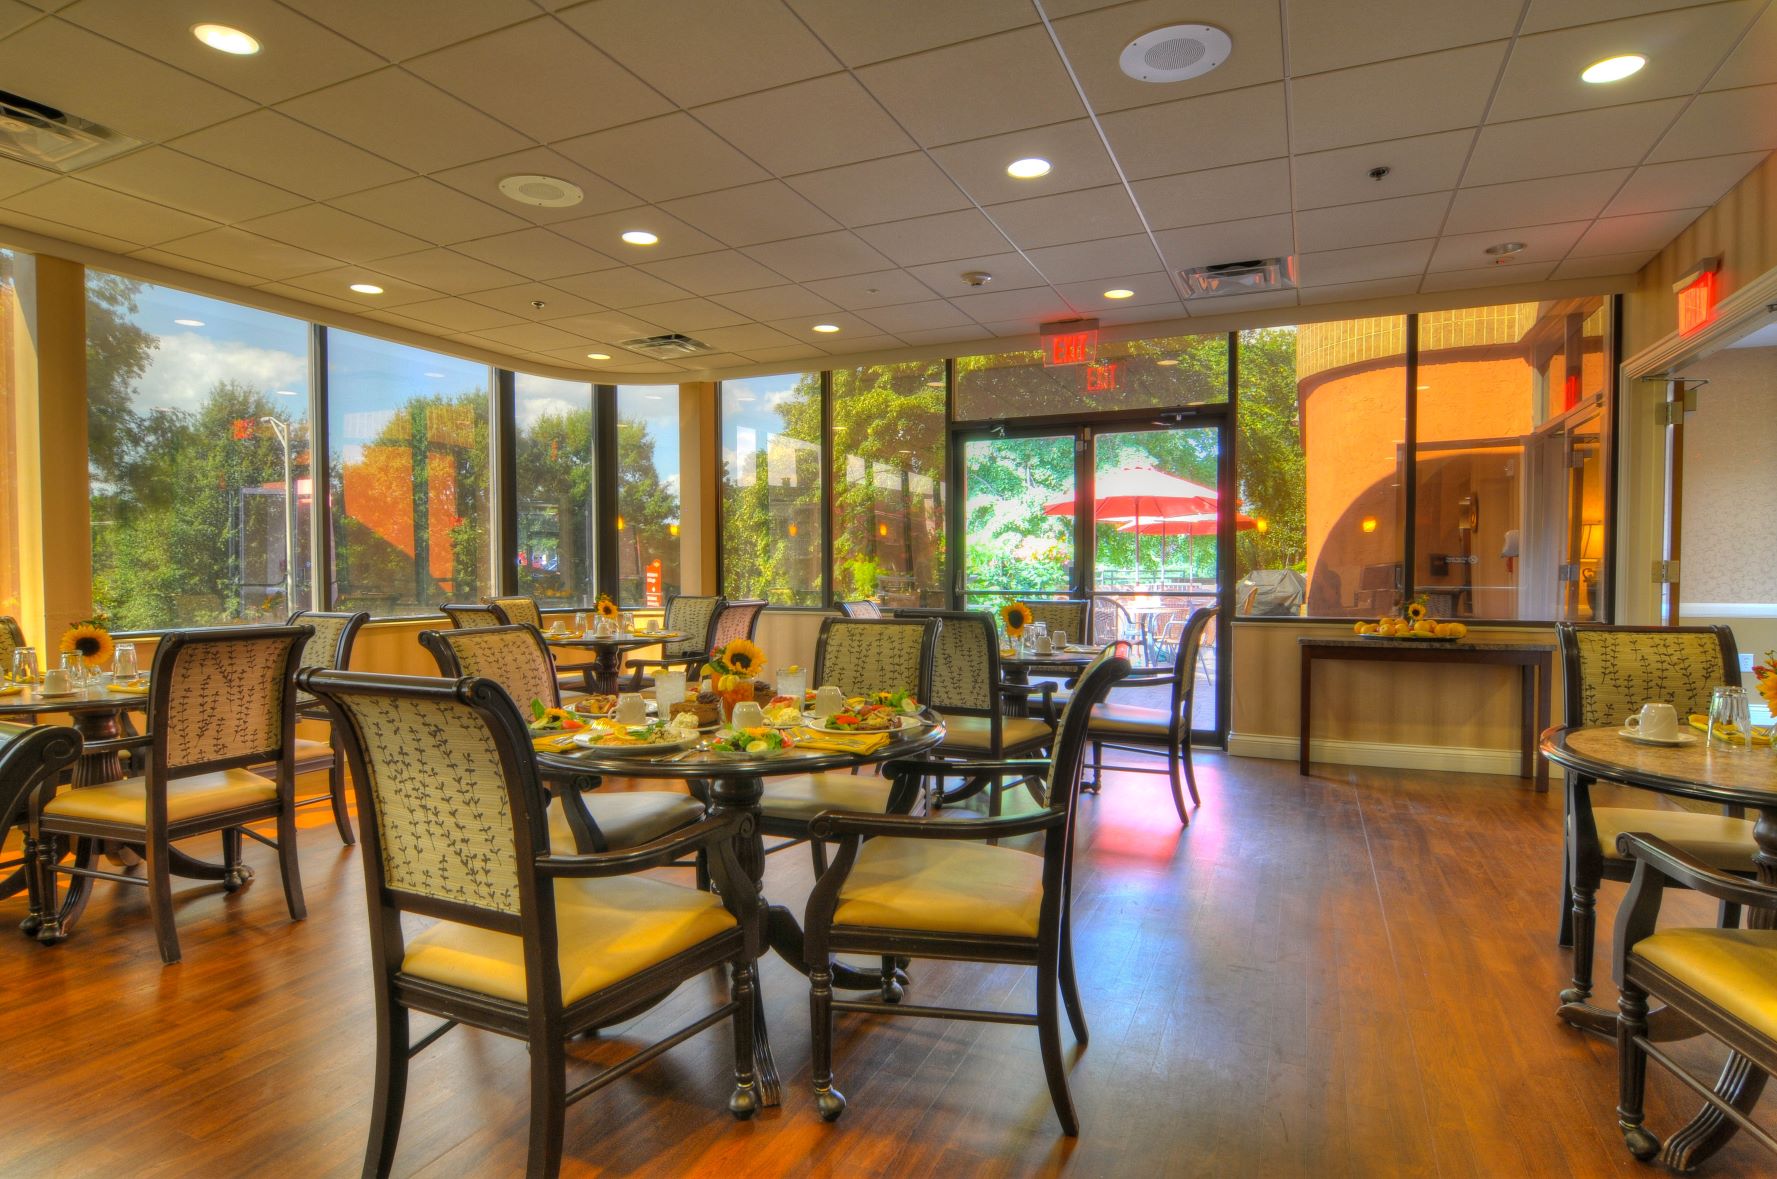 Morningside of Belmont boasts a spacious dining area for our seniors!